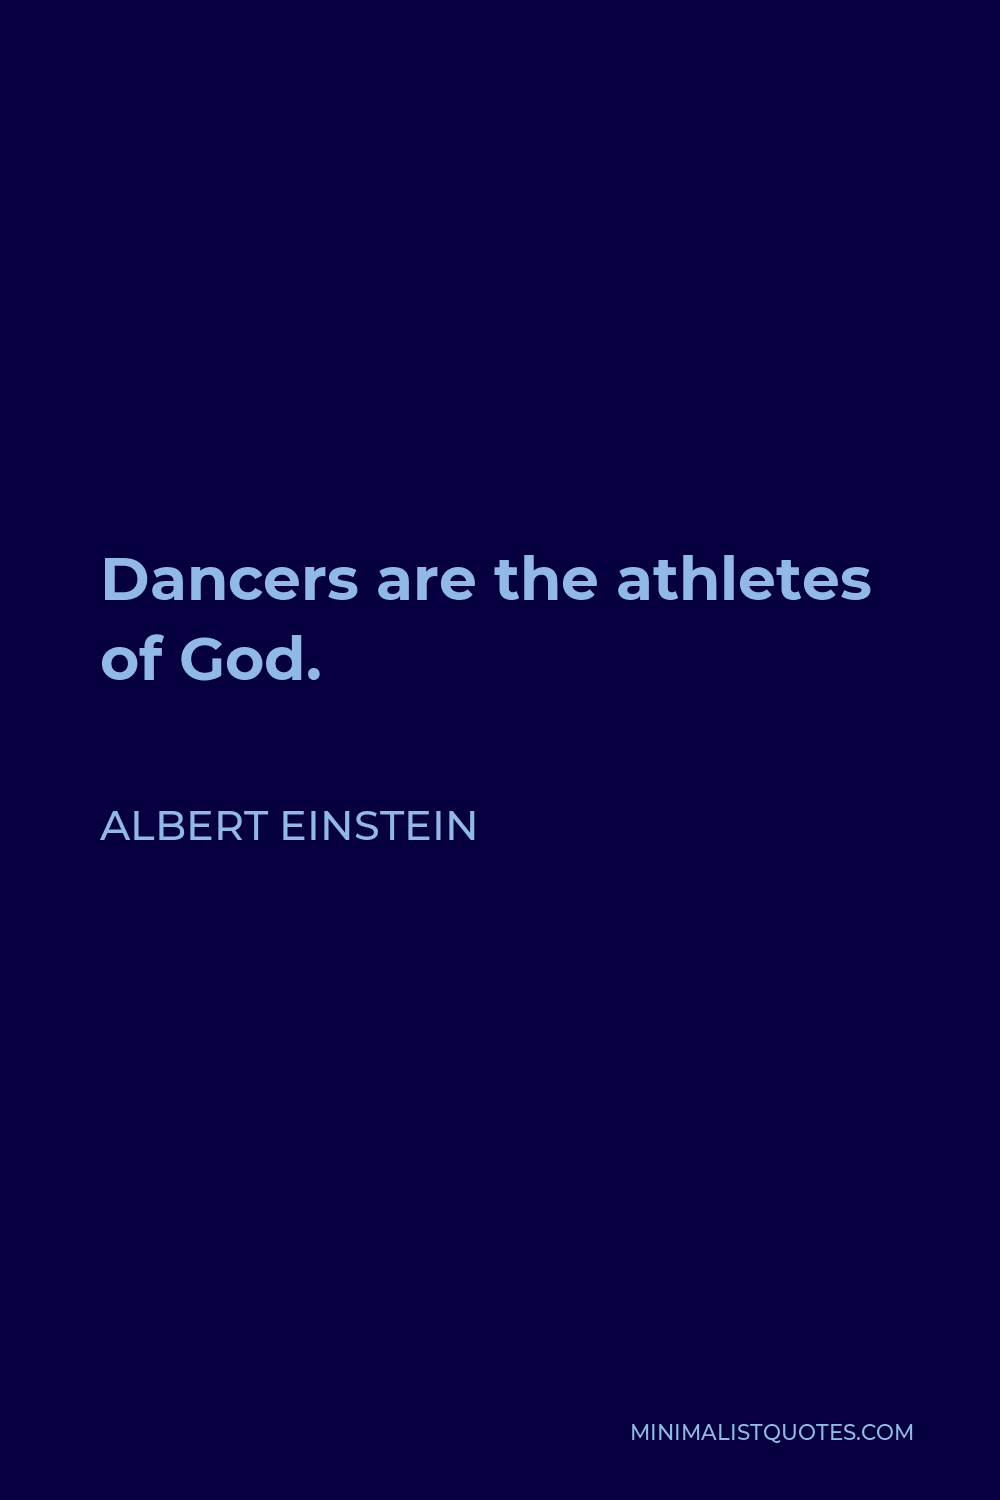 Albert Einstein Quote - Dancers are the athletes of God.